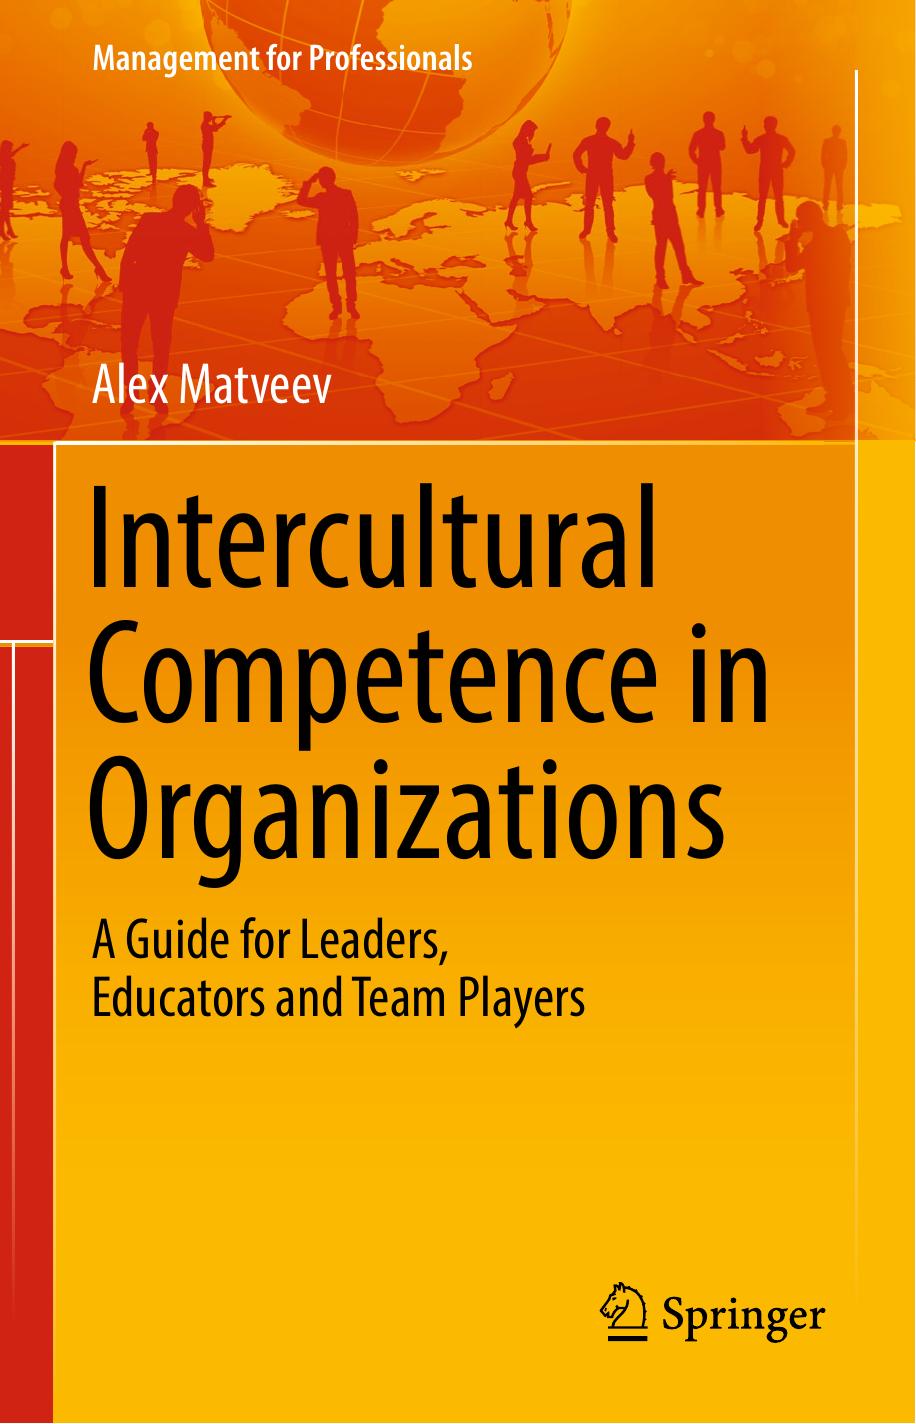 Intercultural Competence in Organizations  A Guide for Leaders, Educators and Team Players 2017